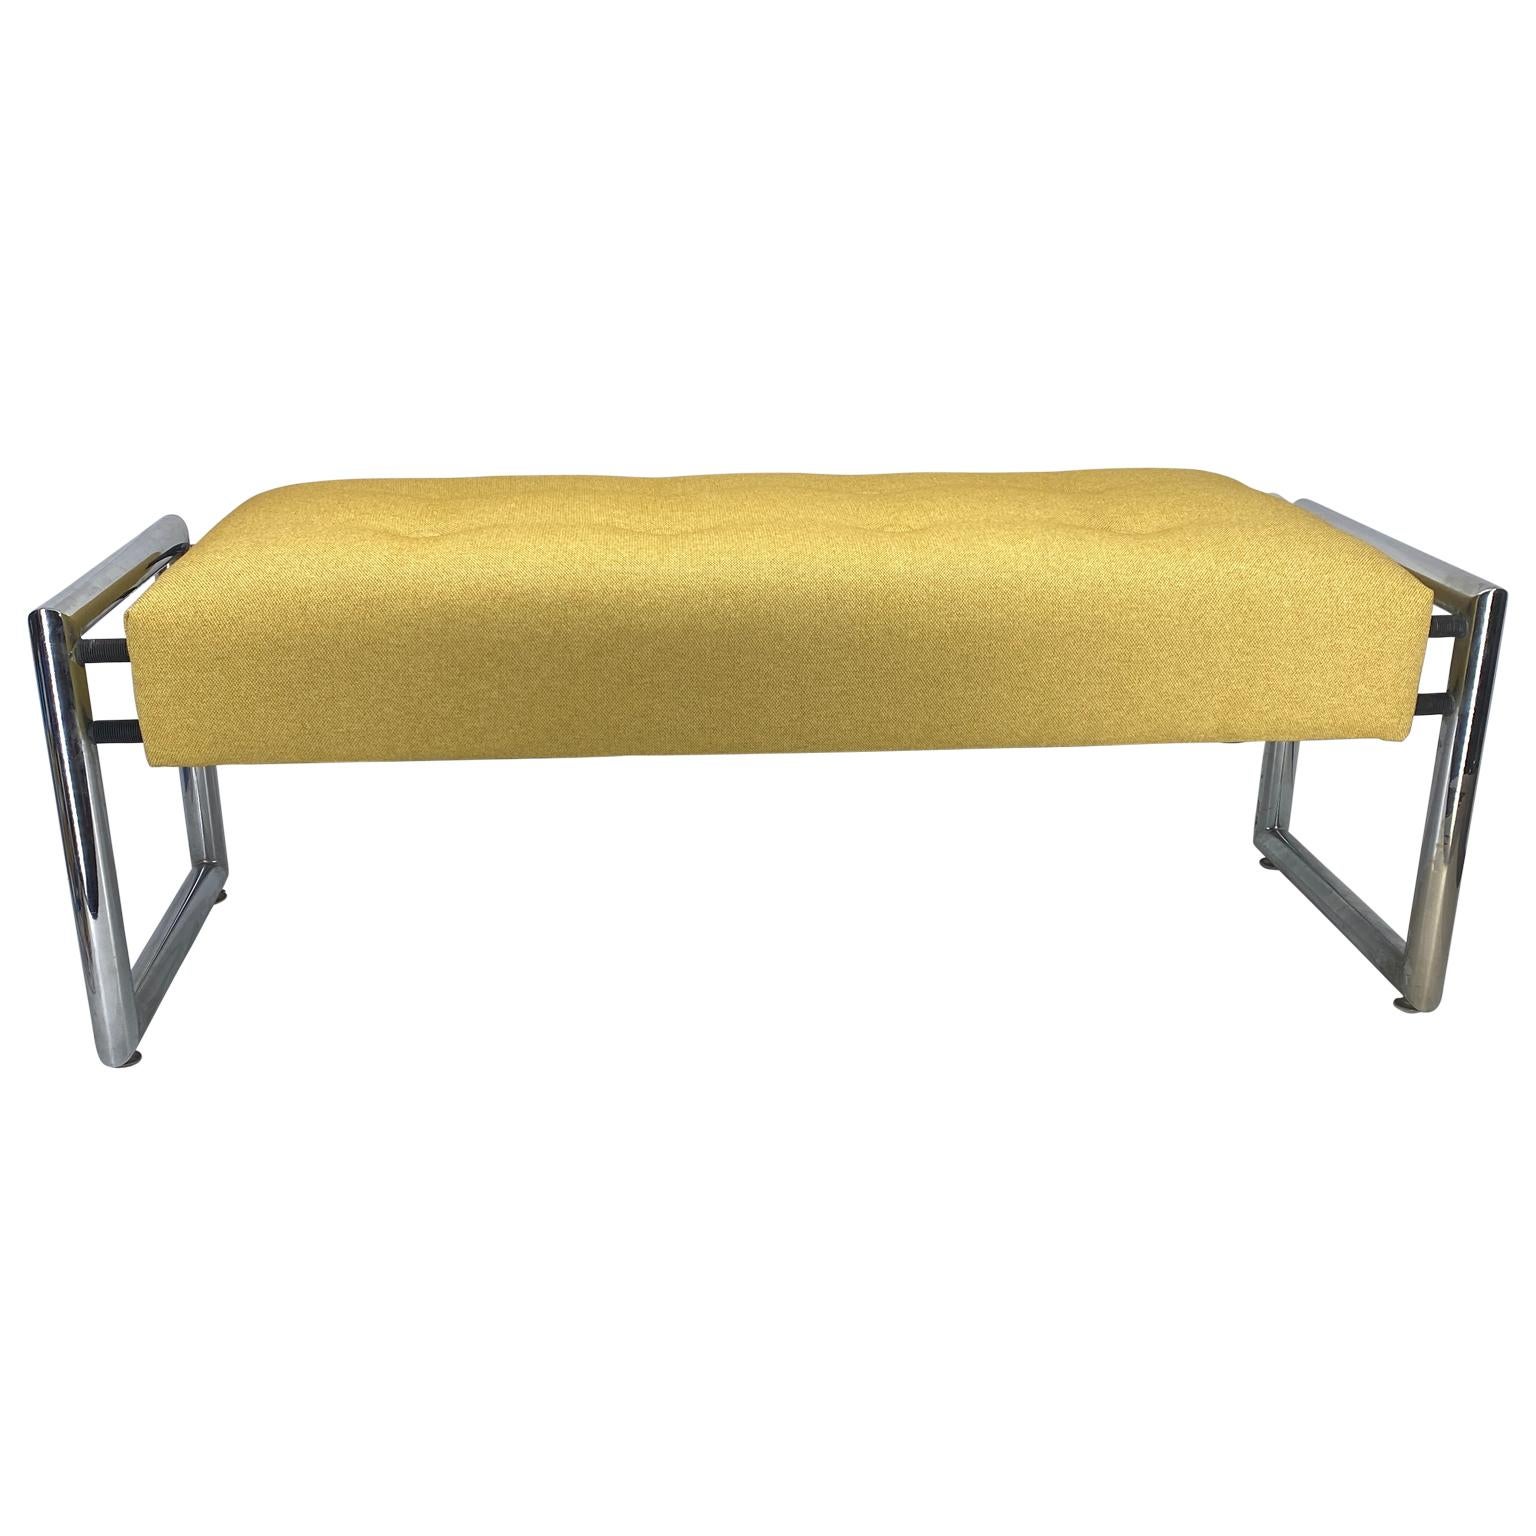 Polished Mid-Century Modern Chrome Bench Knoll Upholstery